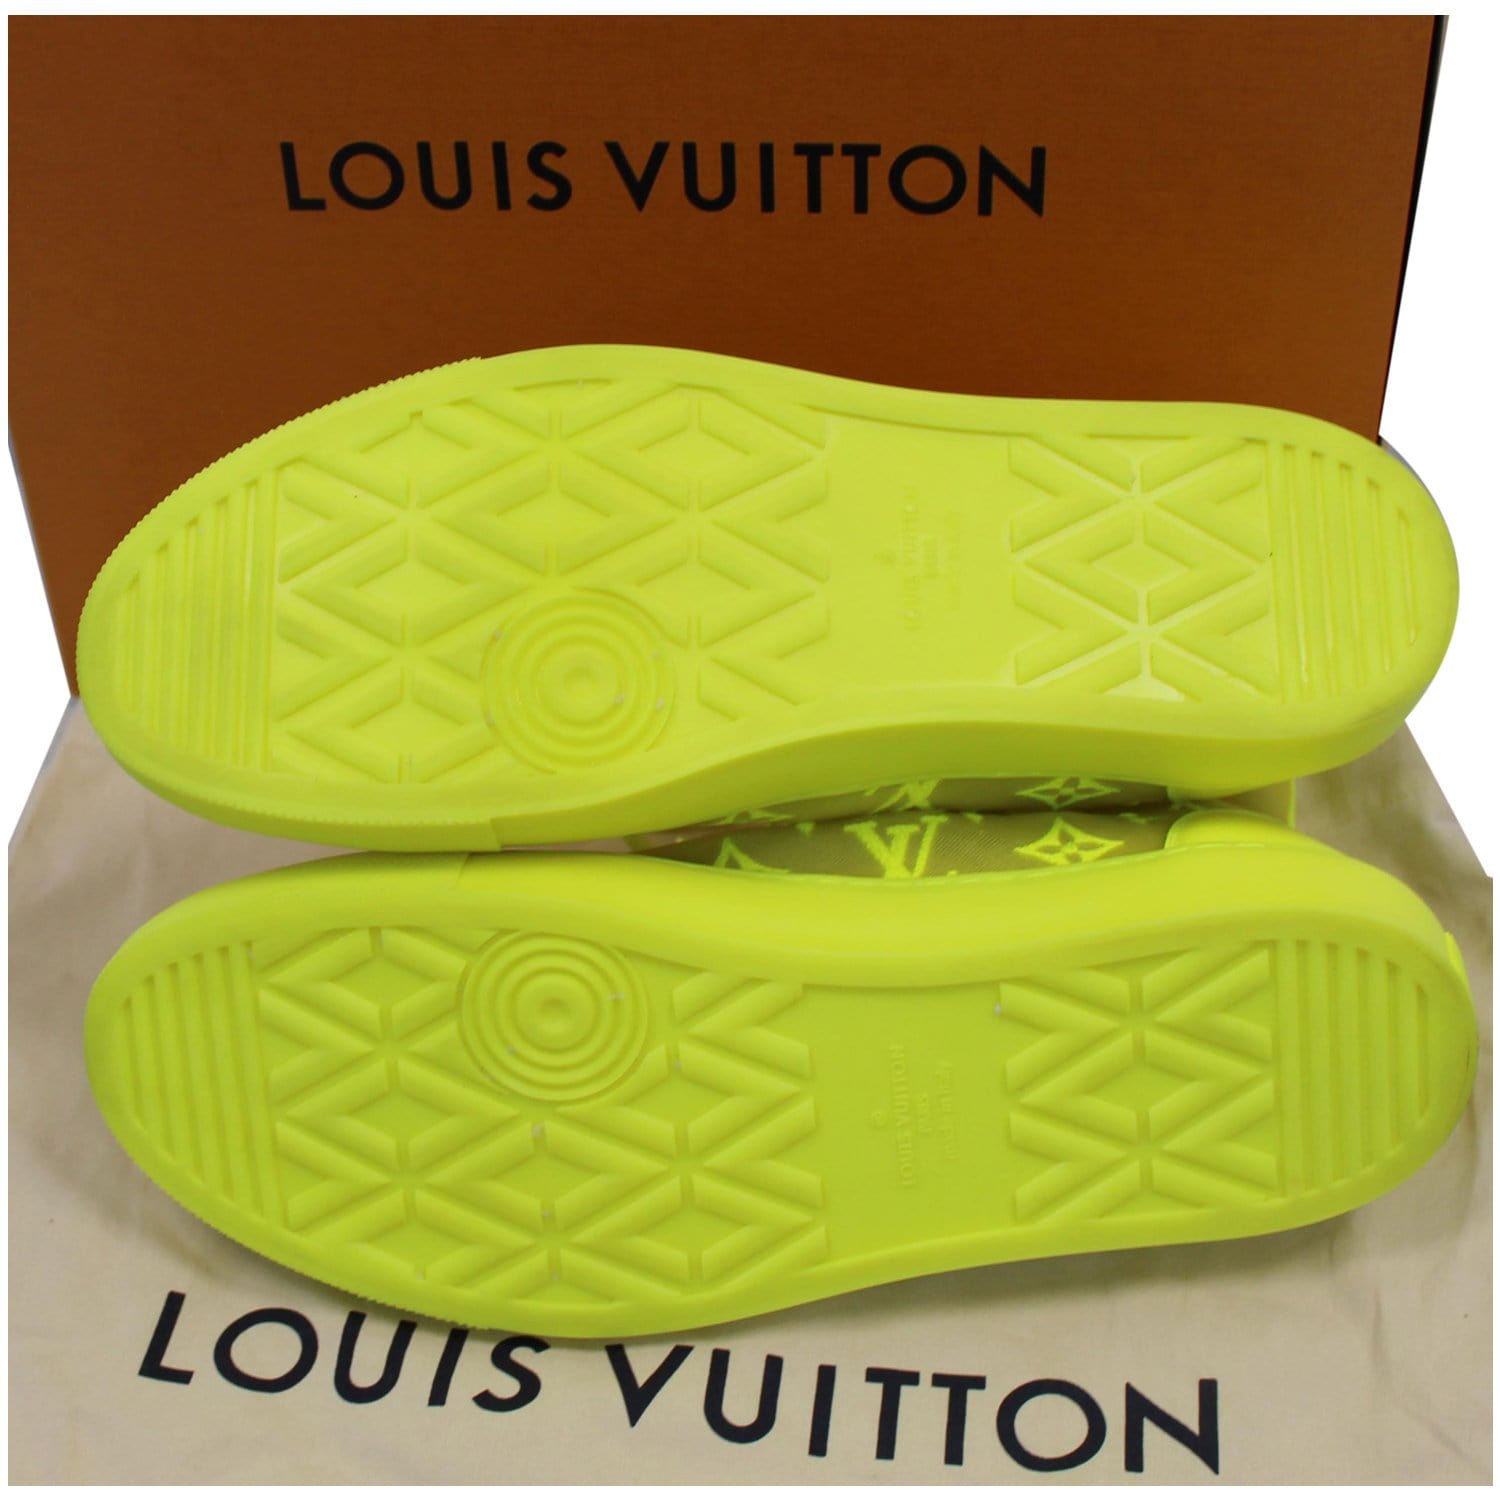 Buy [Used] LOUIS VUITTON LV Tattoo Line High Cut Sneakers Mesh Yellow  1A5S1K from Japan - Buy authentic Plus exclusive items from Japan